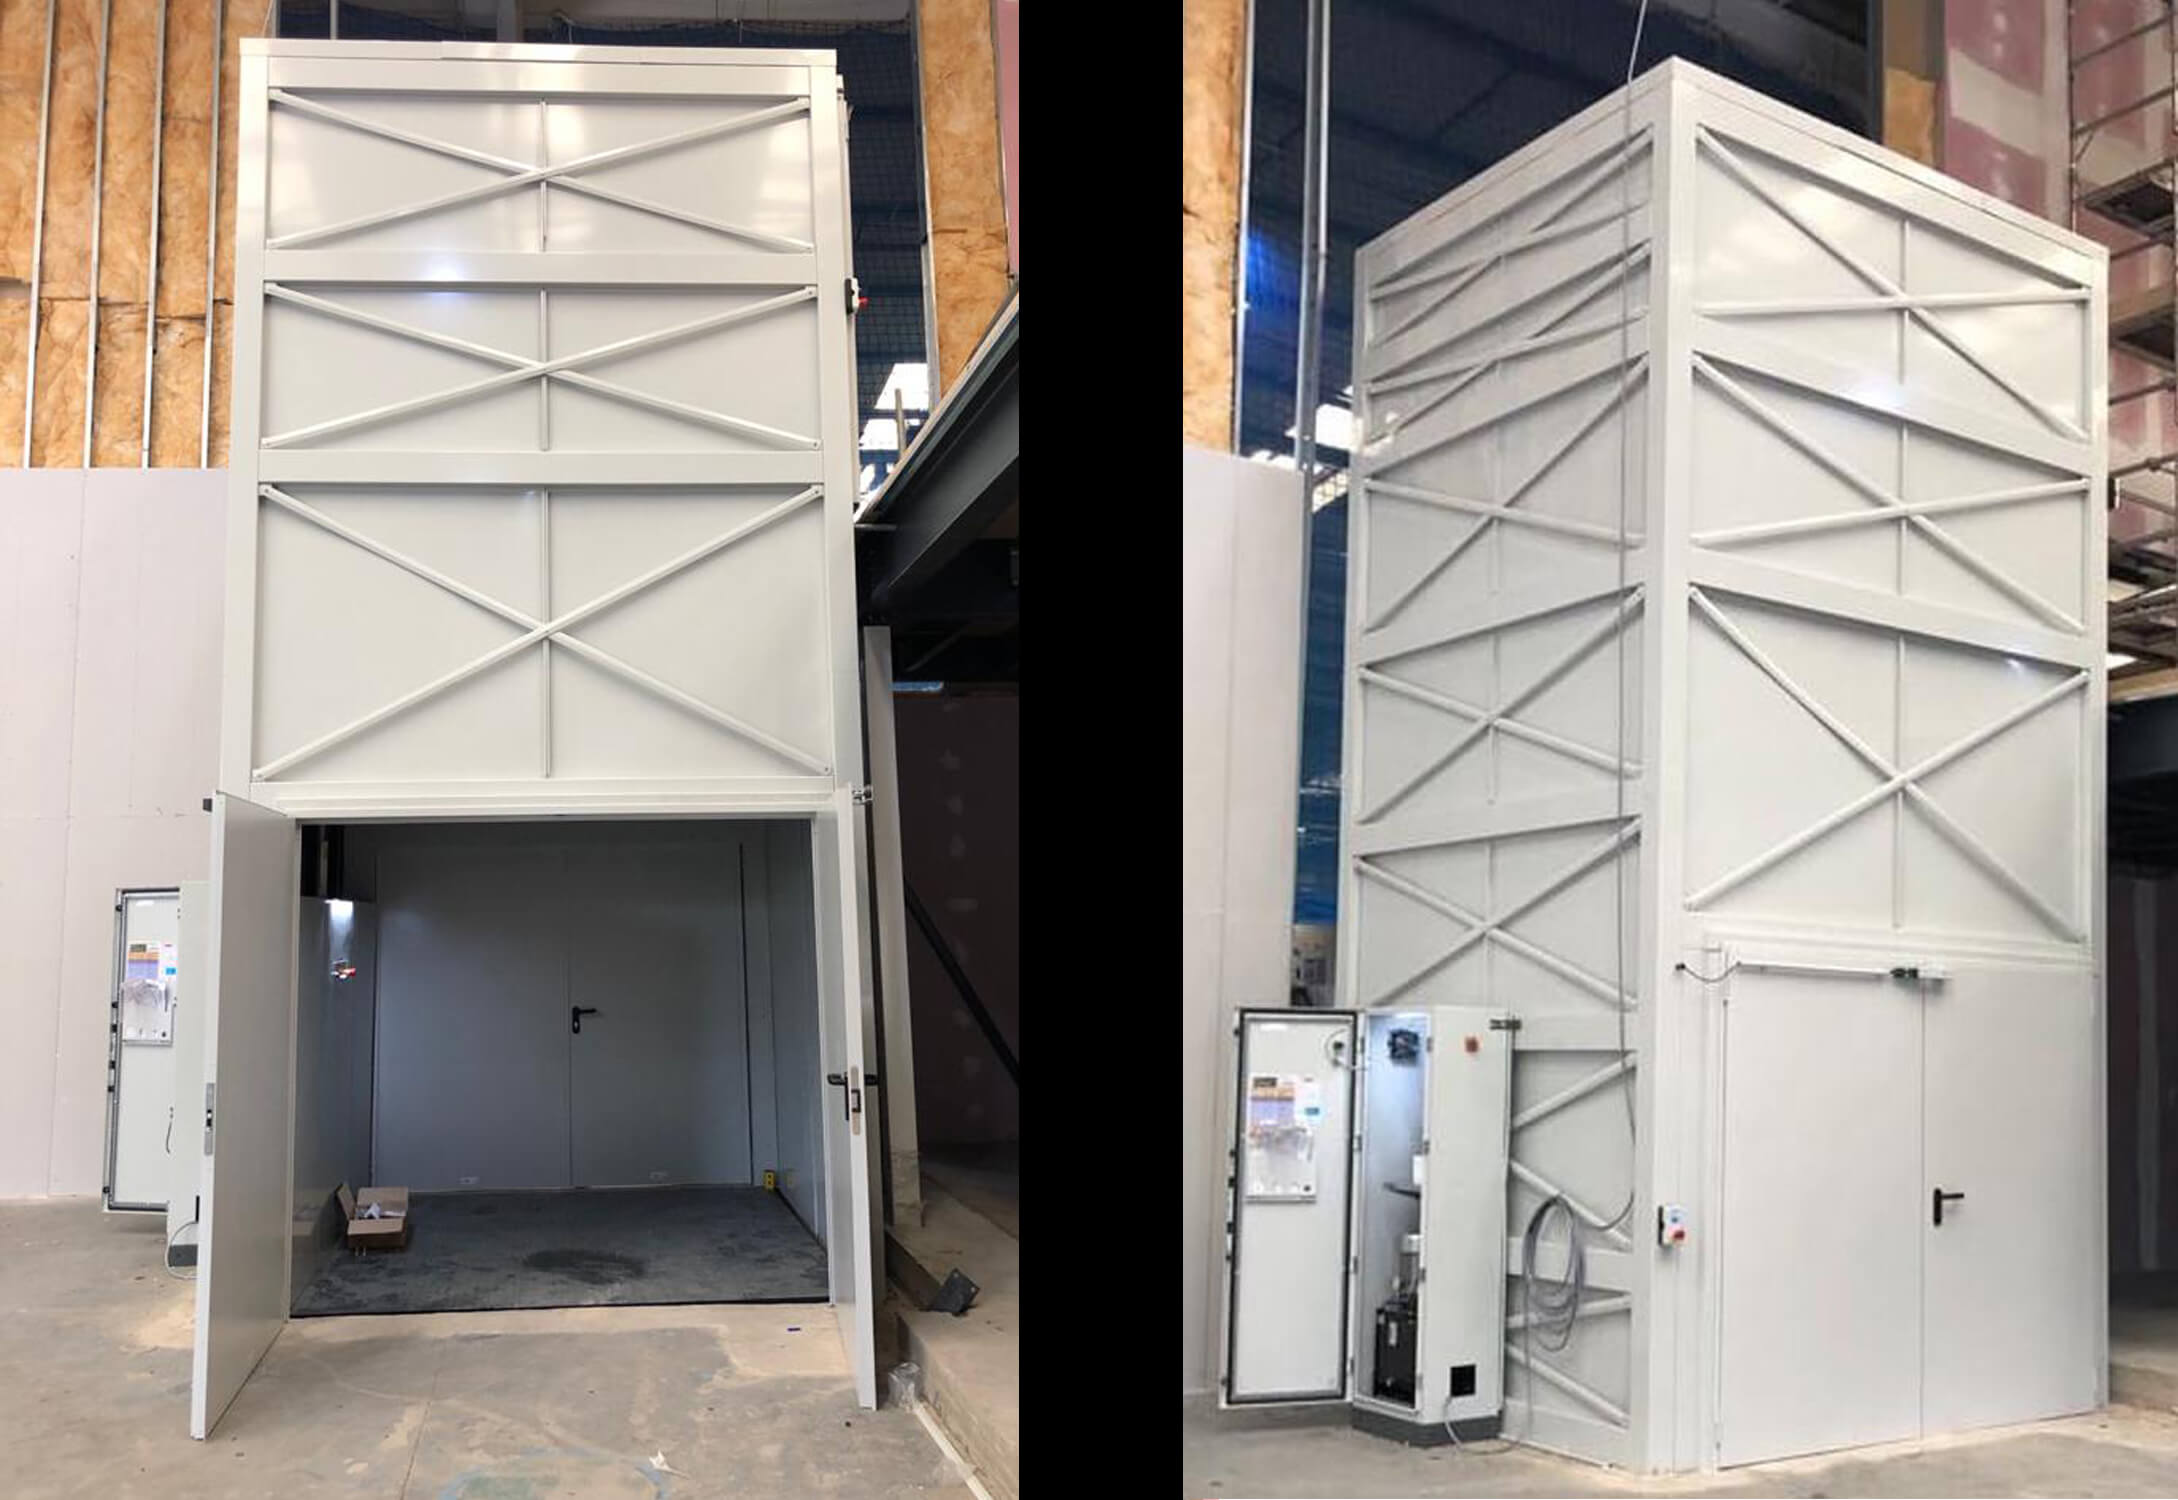 Goods lift installed by RJ Lifts